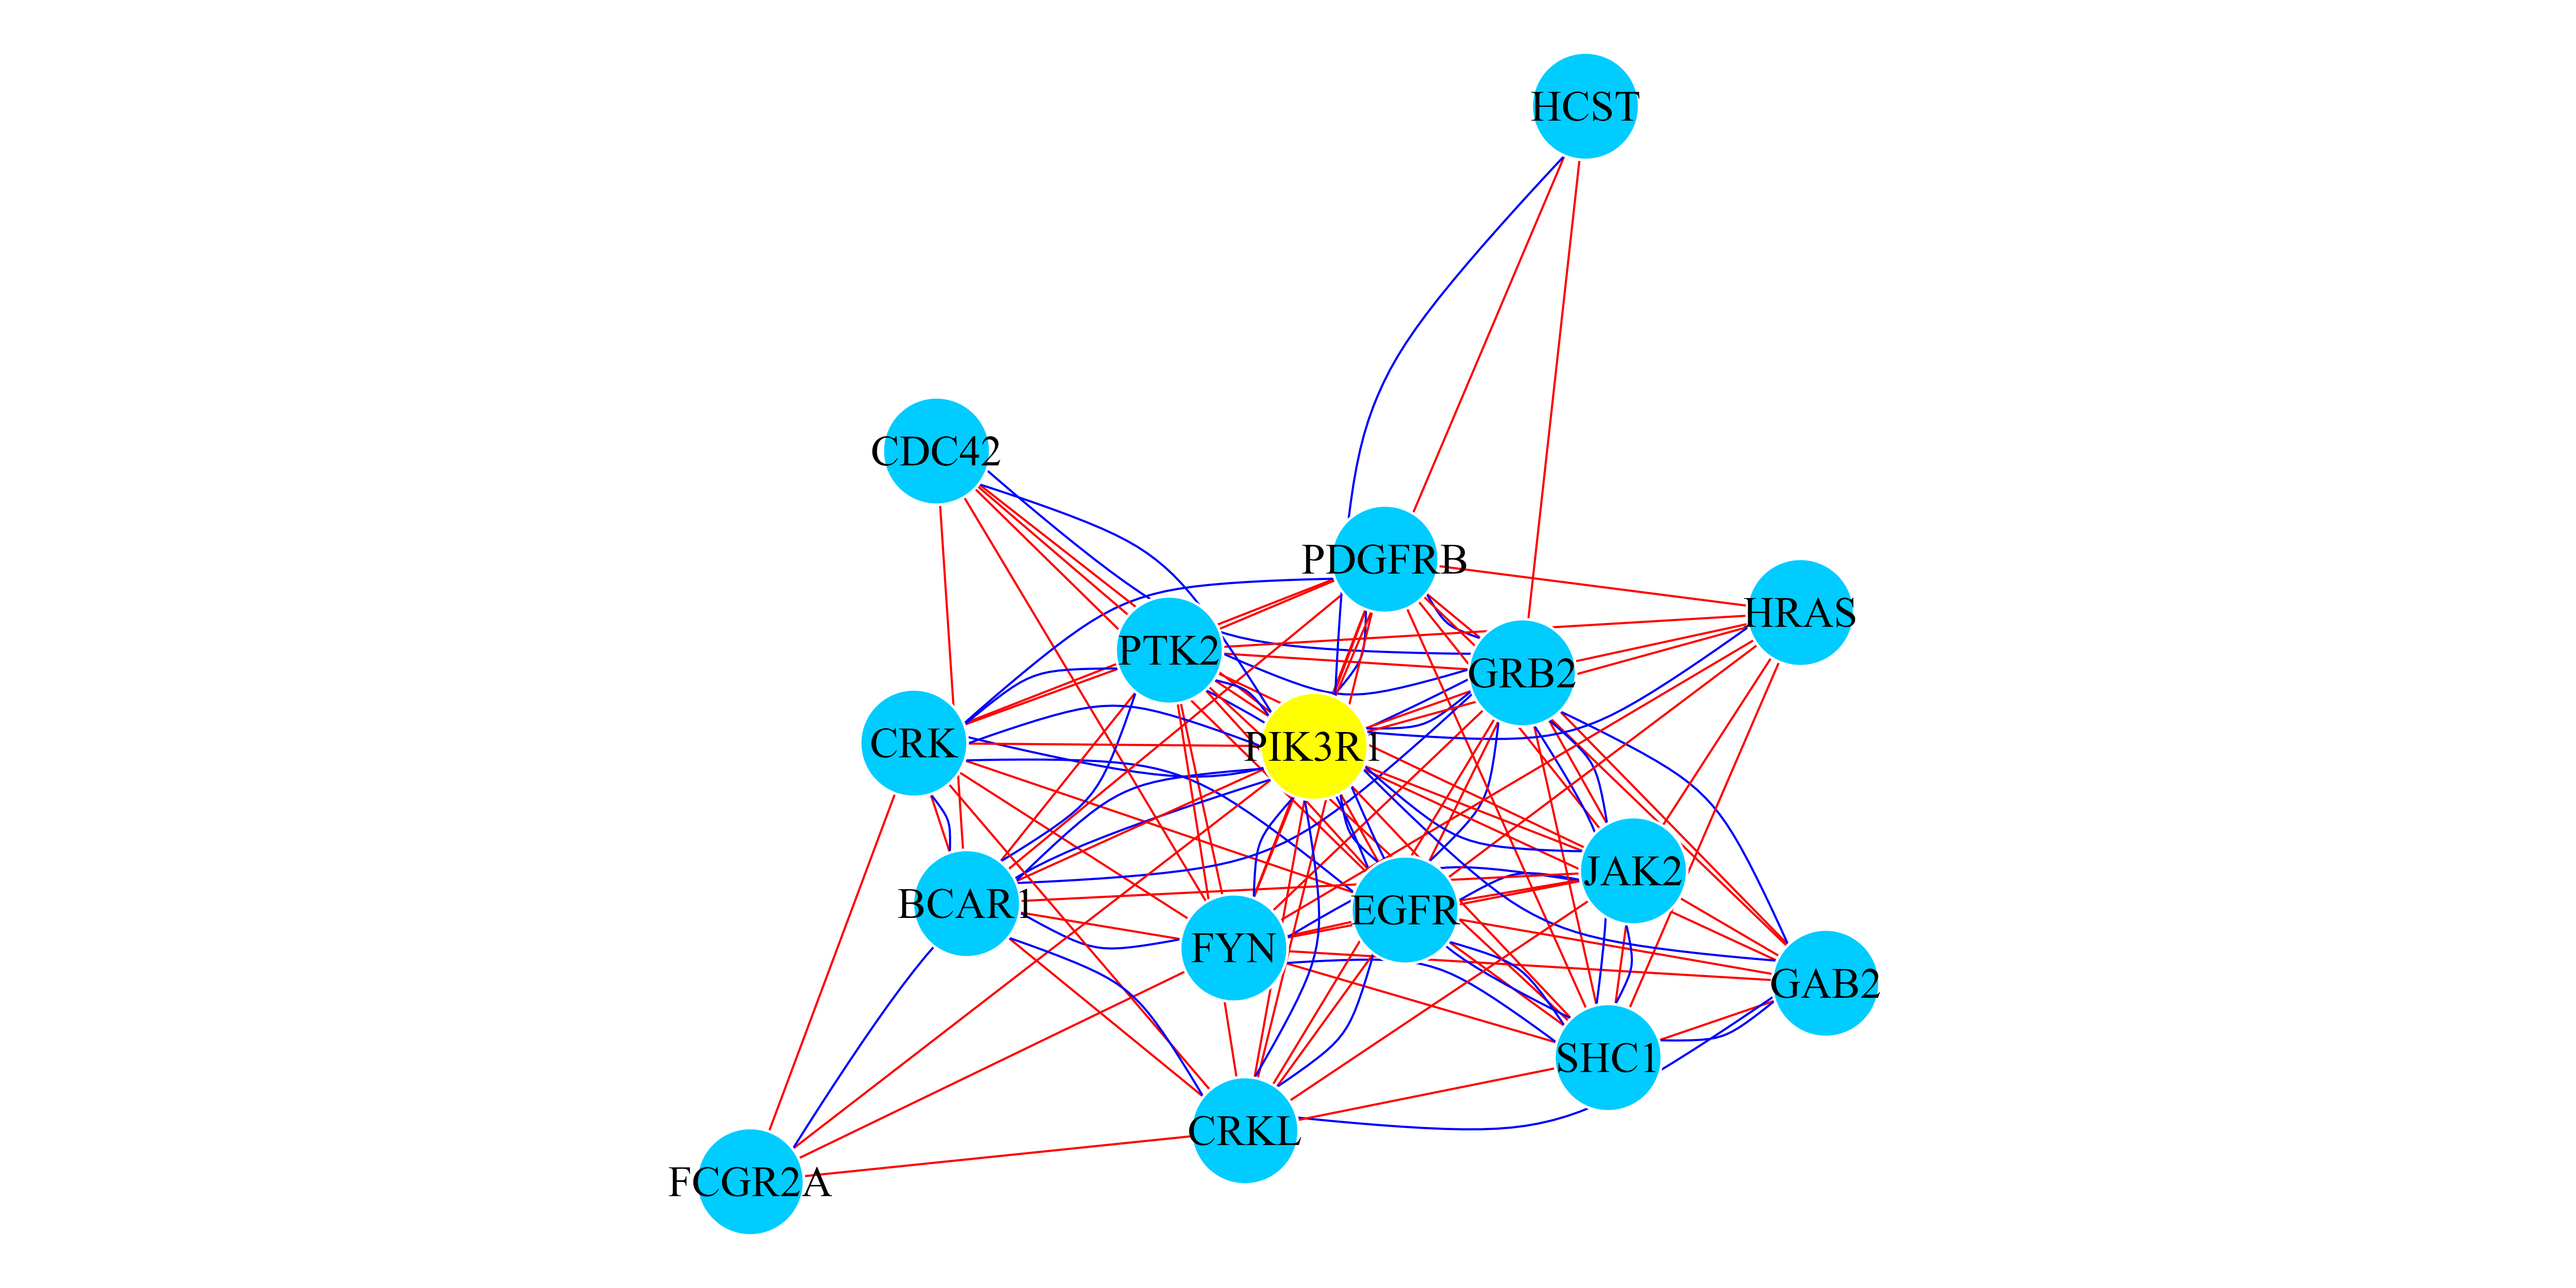 Figure 3: RWR-M on a multiplex PPI-Pathway Network. Network representation of the top 15 ranked genes when the RWR-M algorithm is executed using the *PIK3R1* gene (yellownode). Blue curved edges are PPI interactions and red straight edges are Pathways links. All the interactions are aggregated into a monoplex network only for visualization purposes.